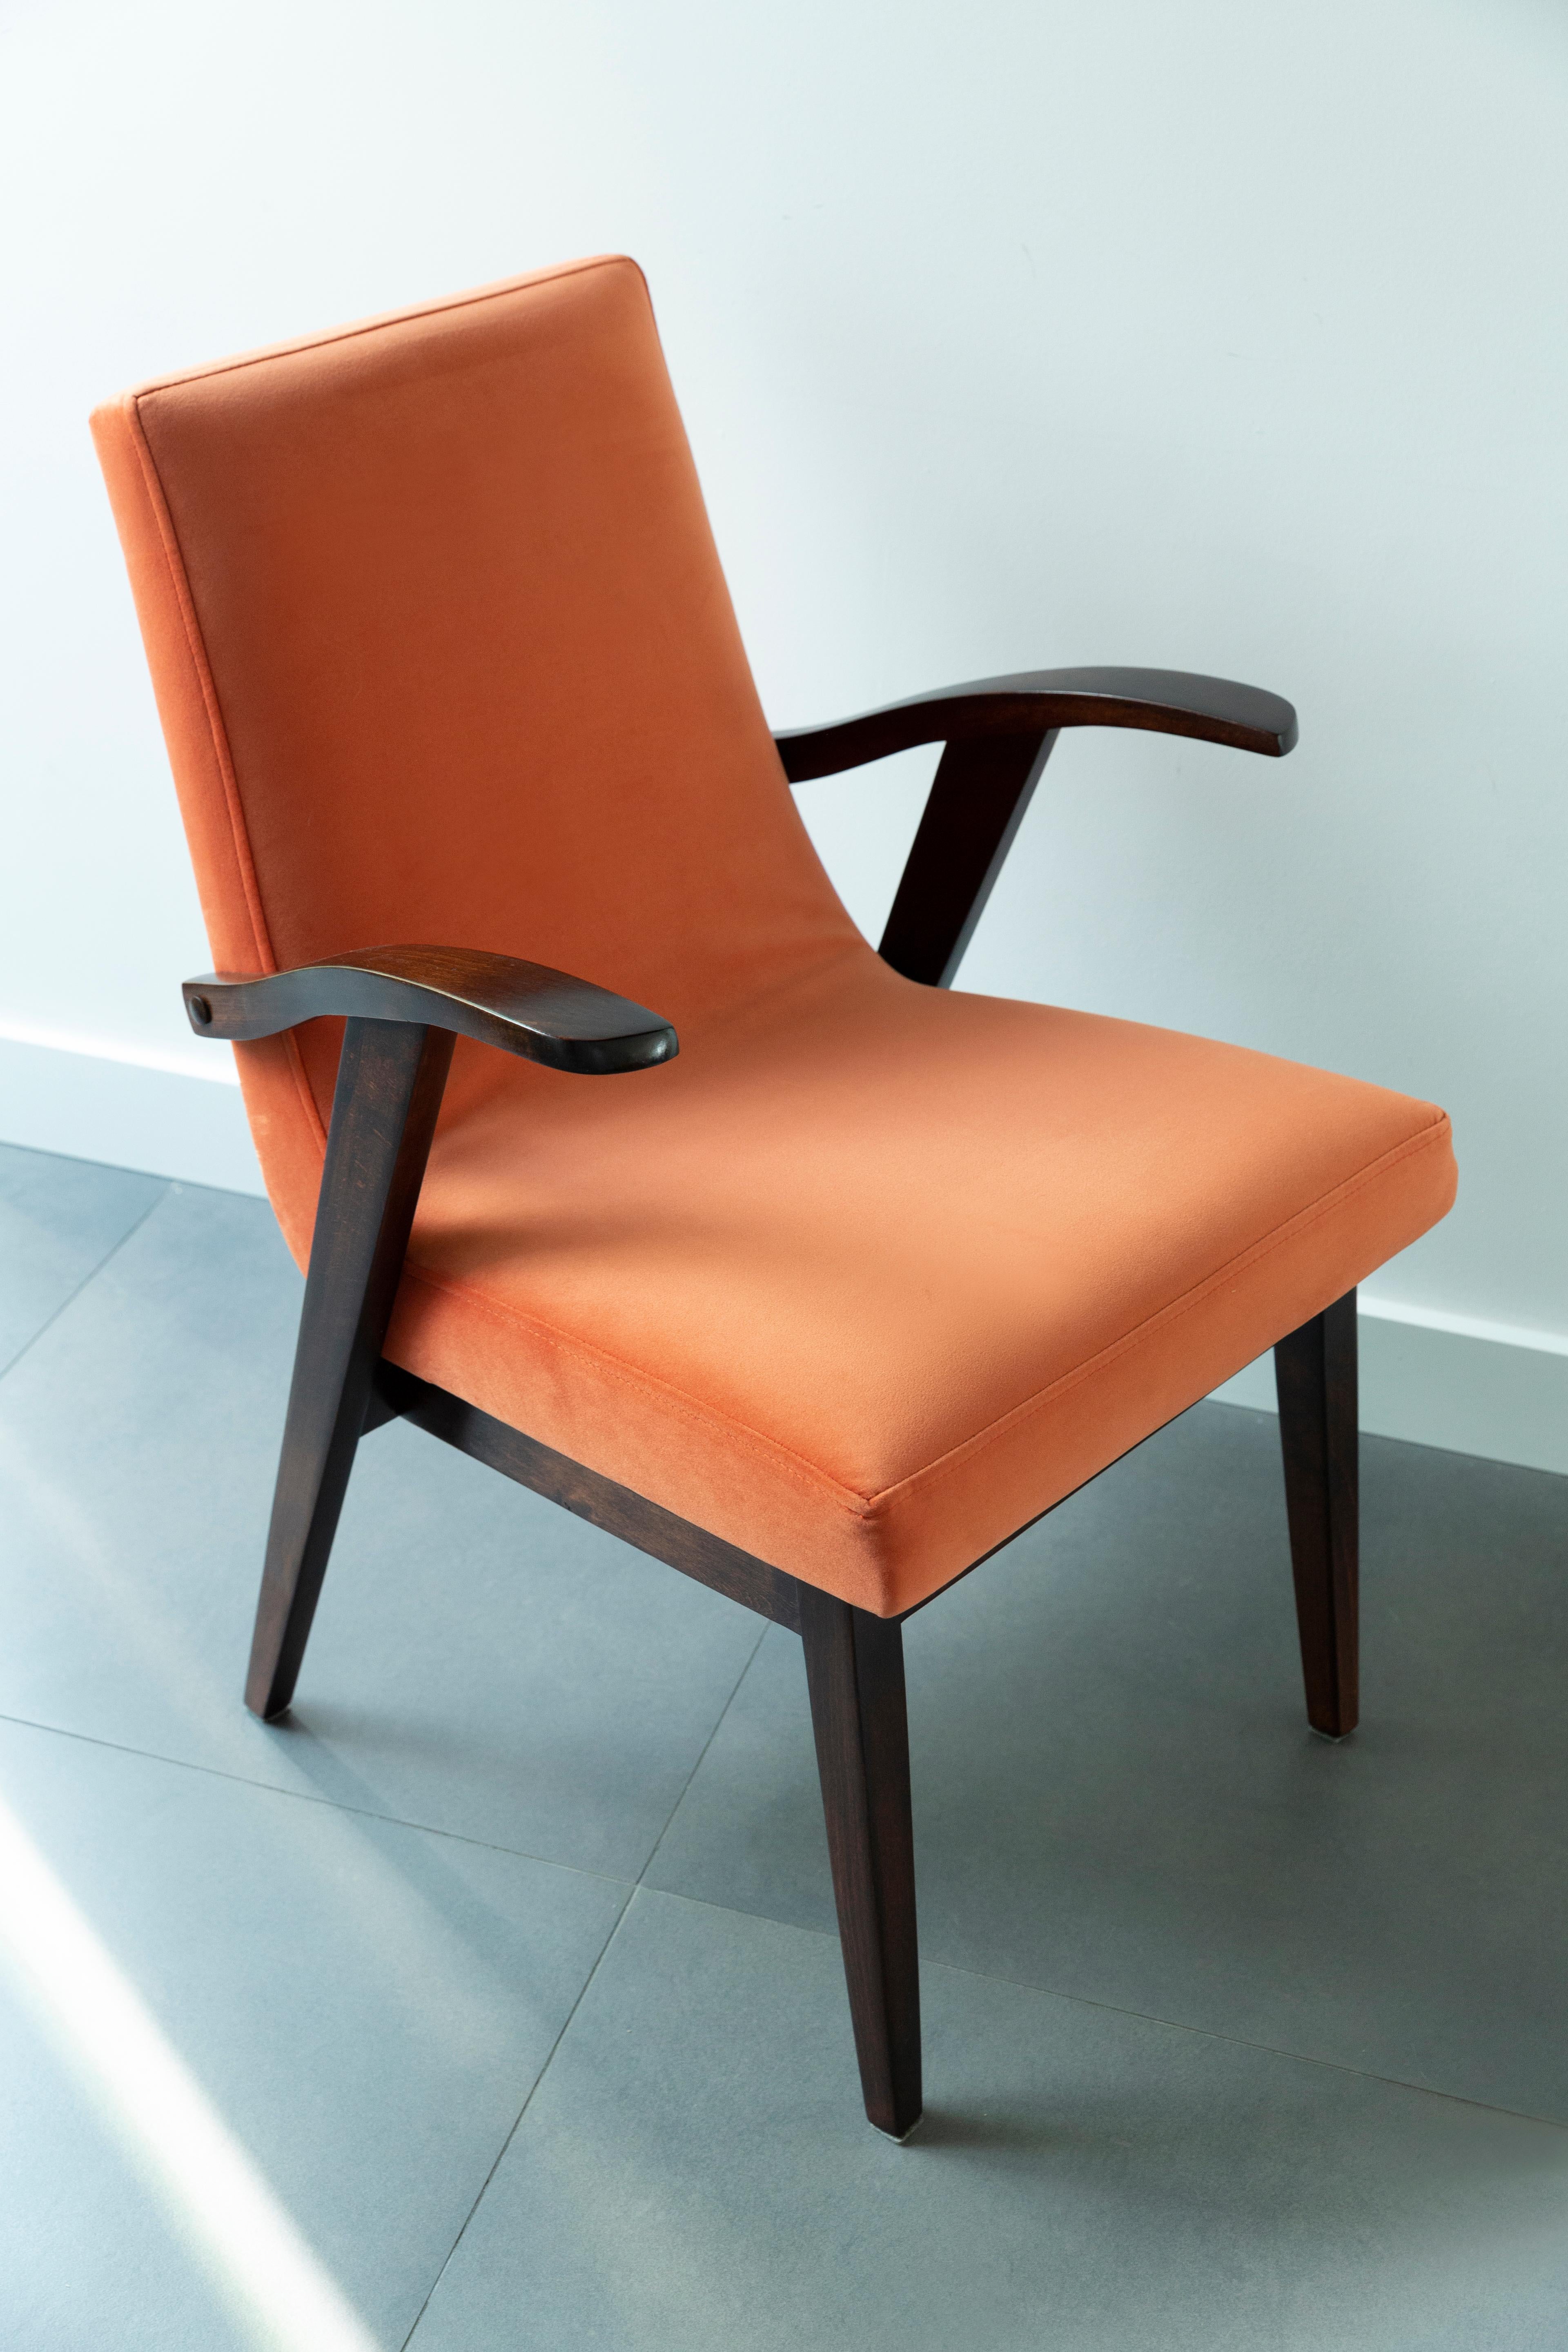 Set of Four Vintage Chairs in Orange Velvet by Mieczyslaw Puchala, 1960s For Sale 1